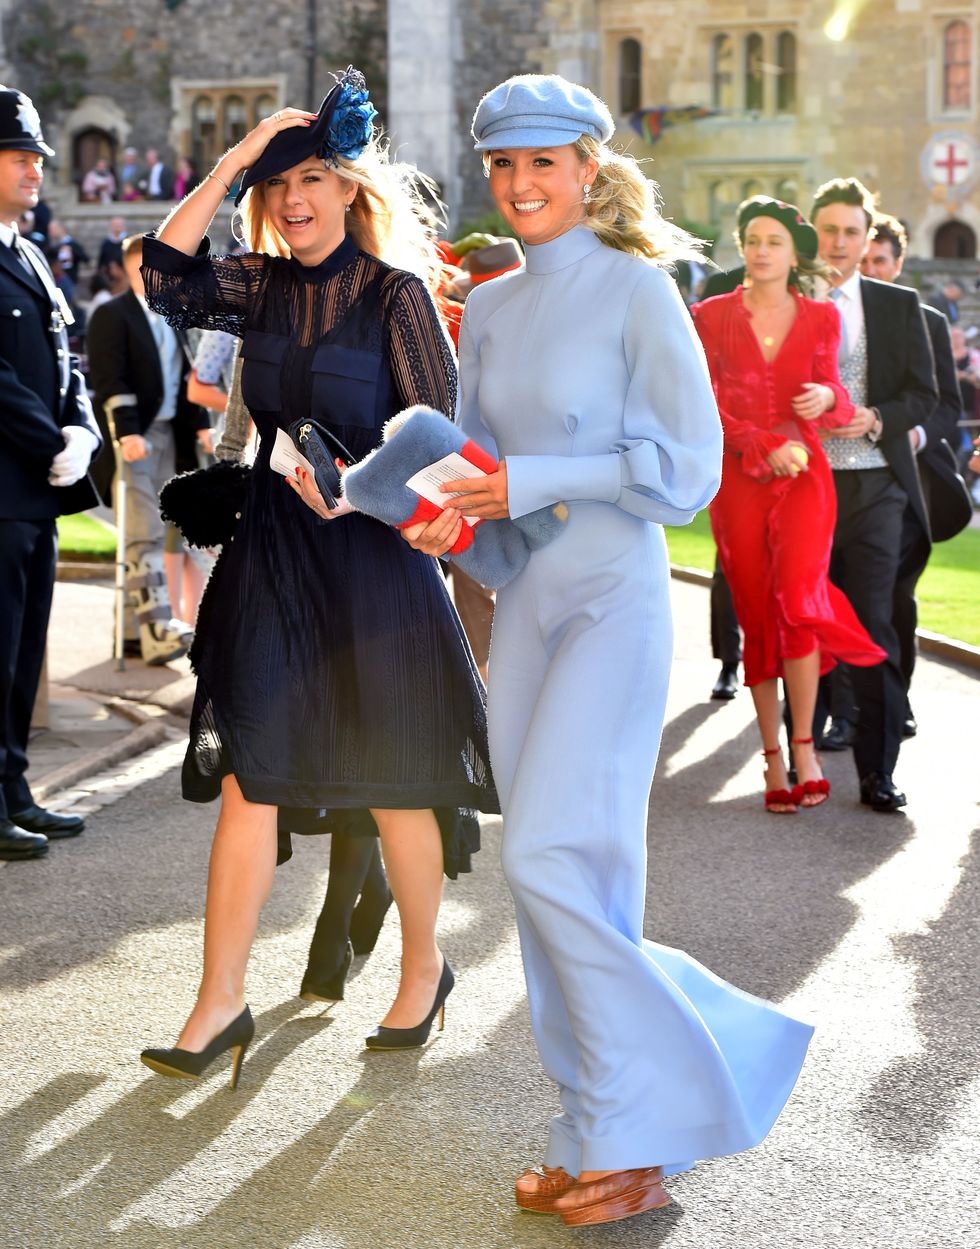 Chelsy Davy arriving at Princess Eugenie's wedding